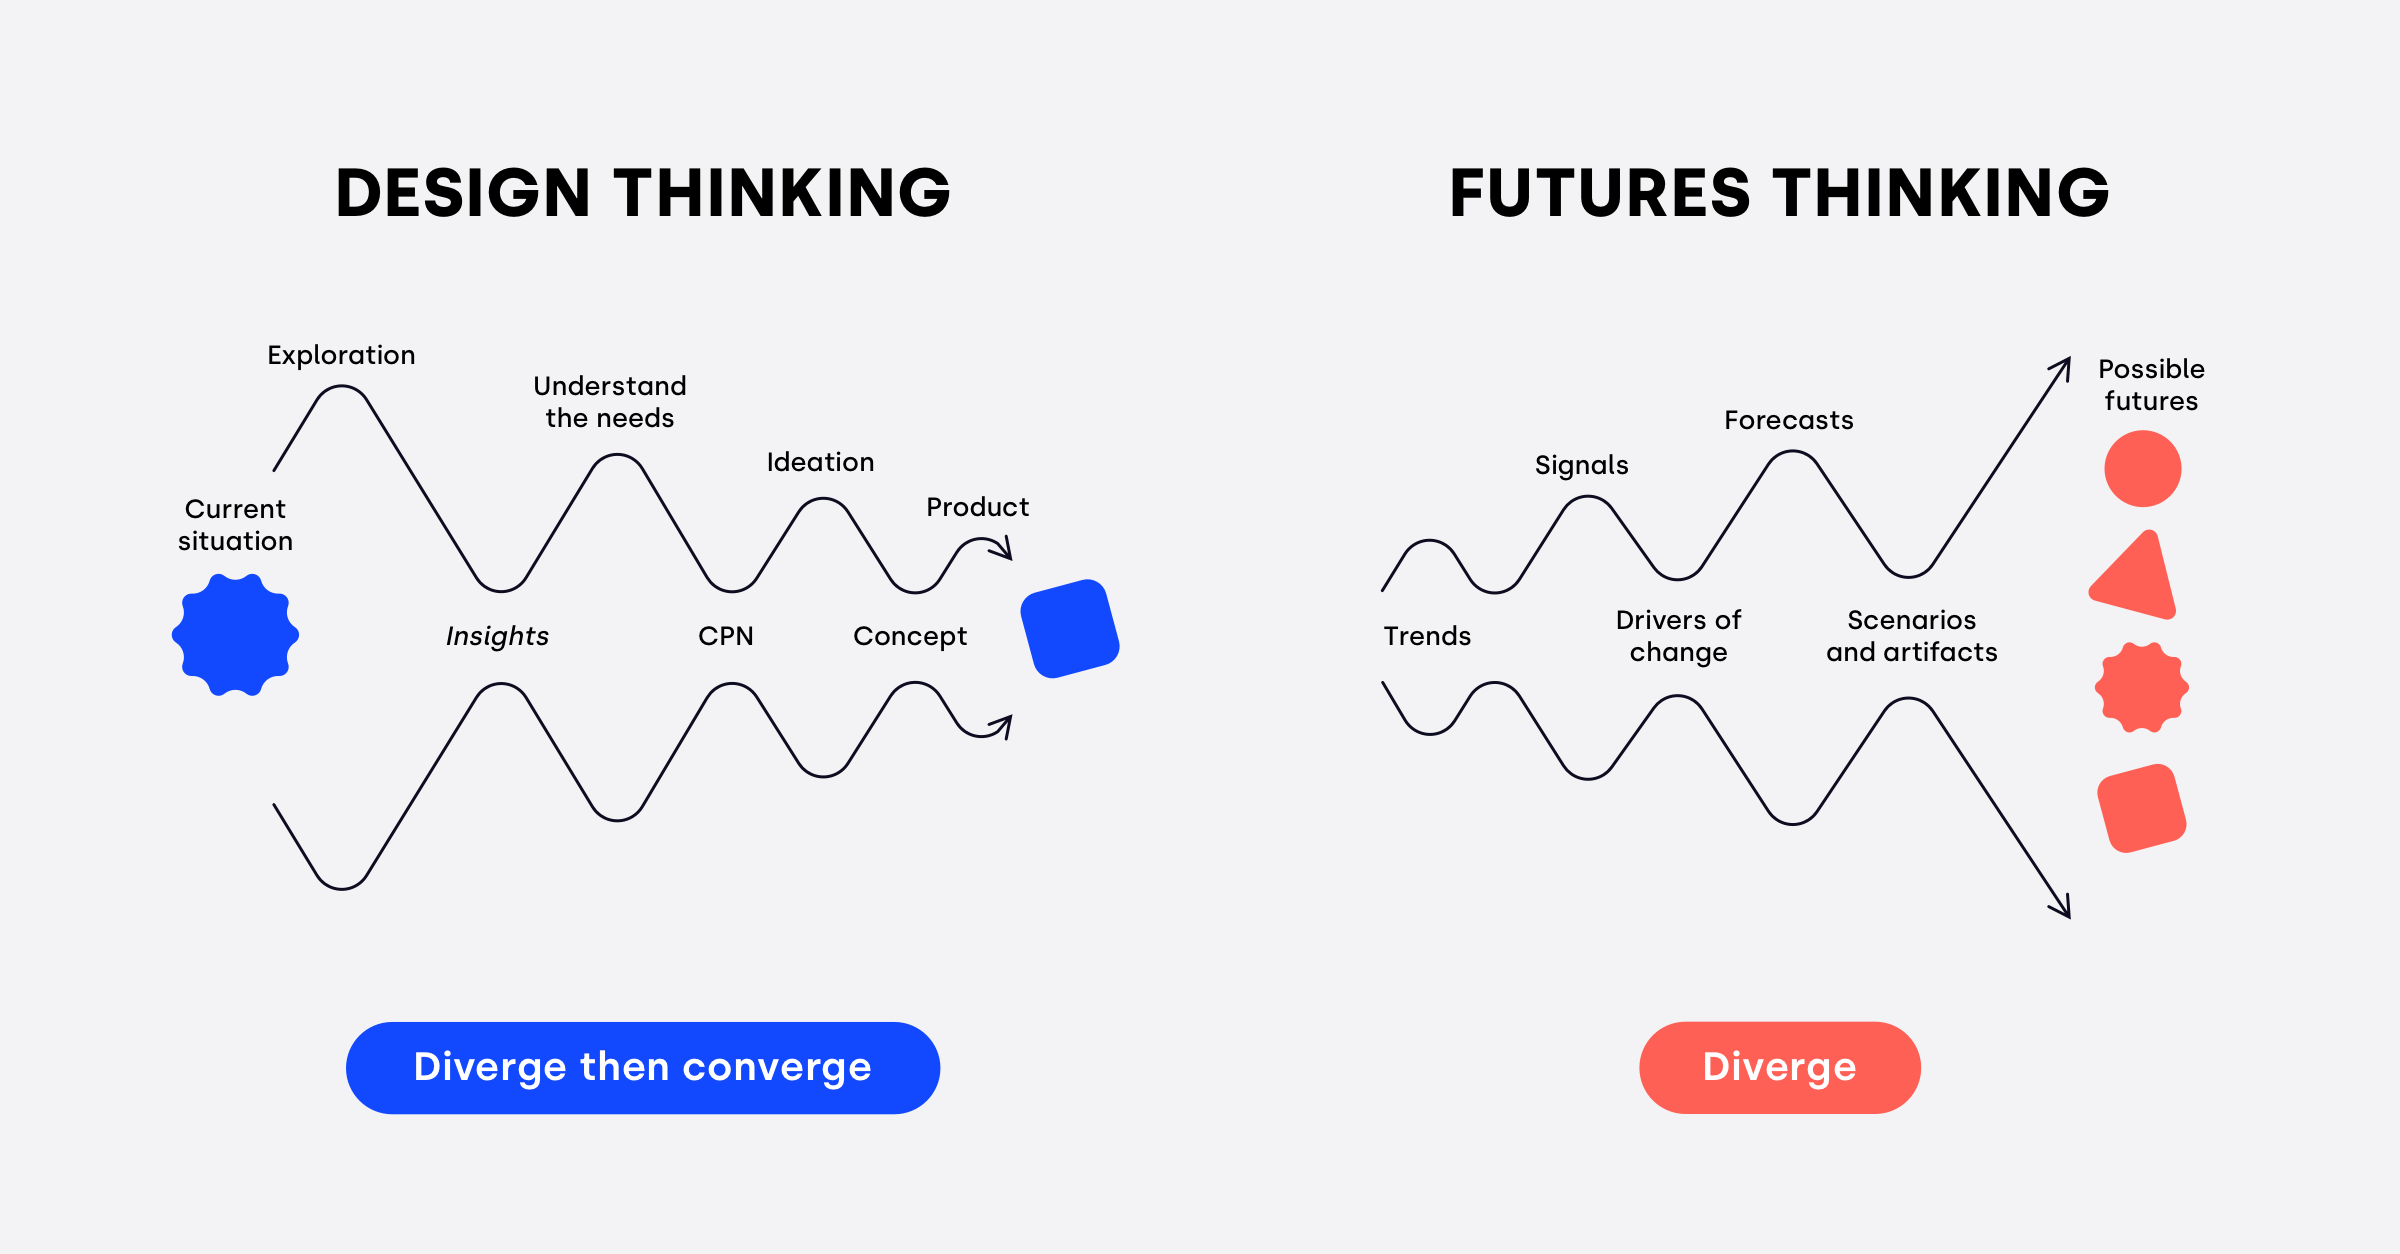 Comparison between Design Thinking and Futures Thinking